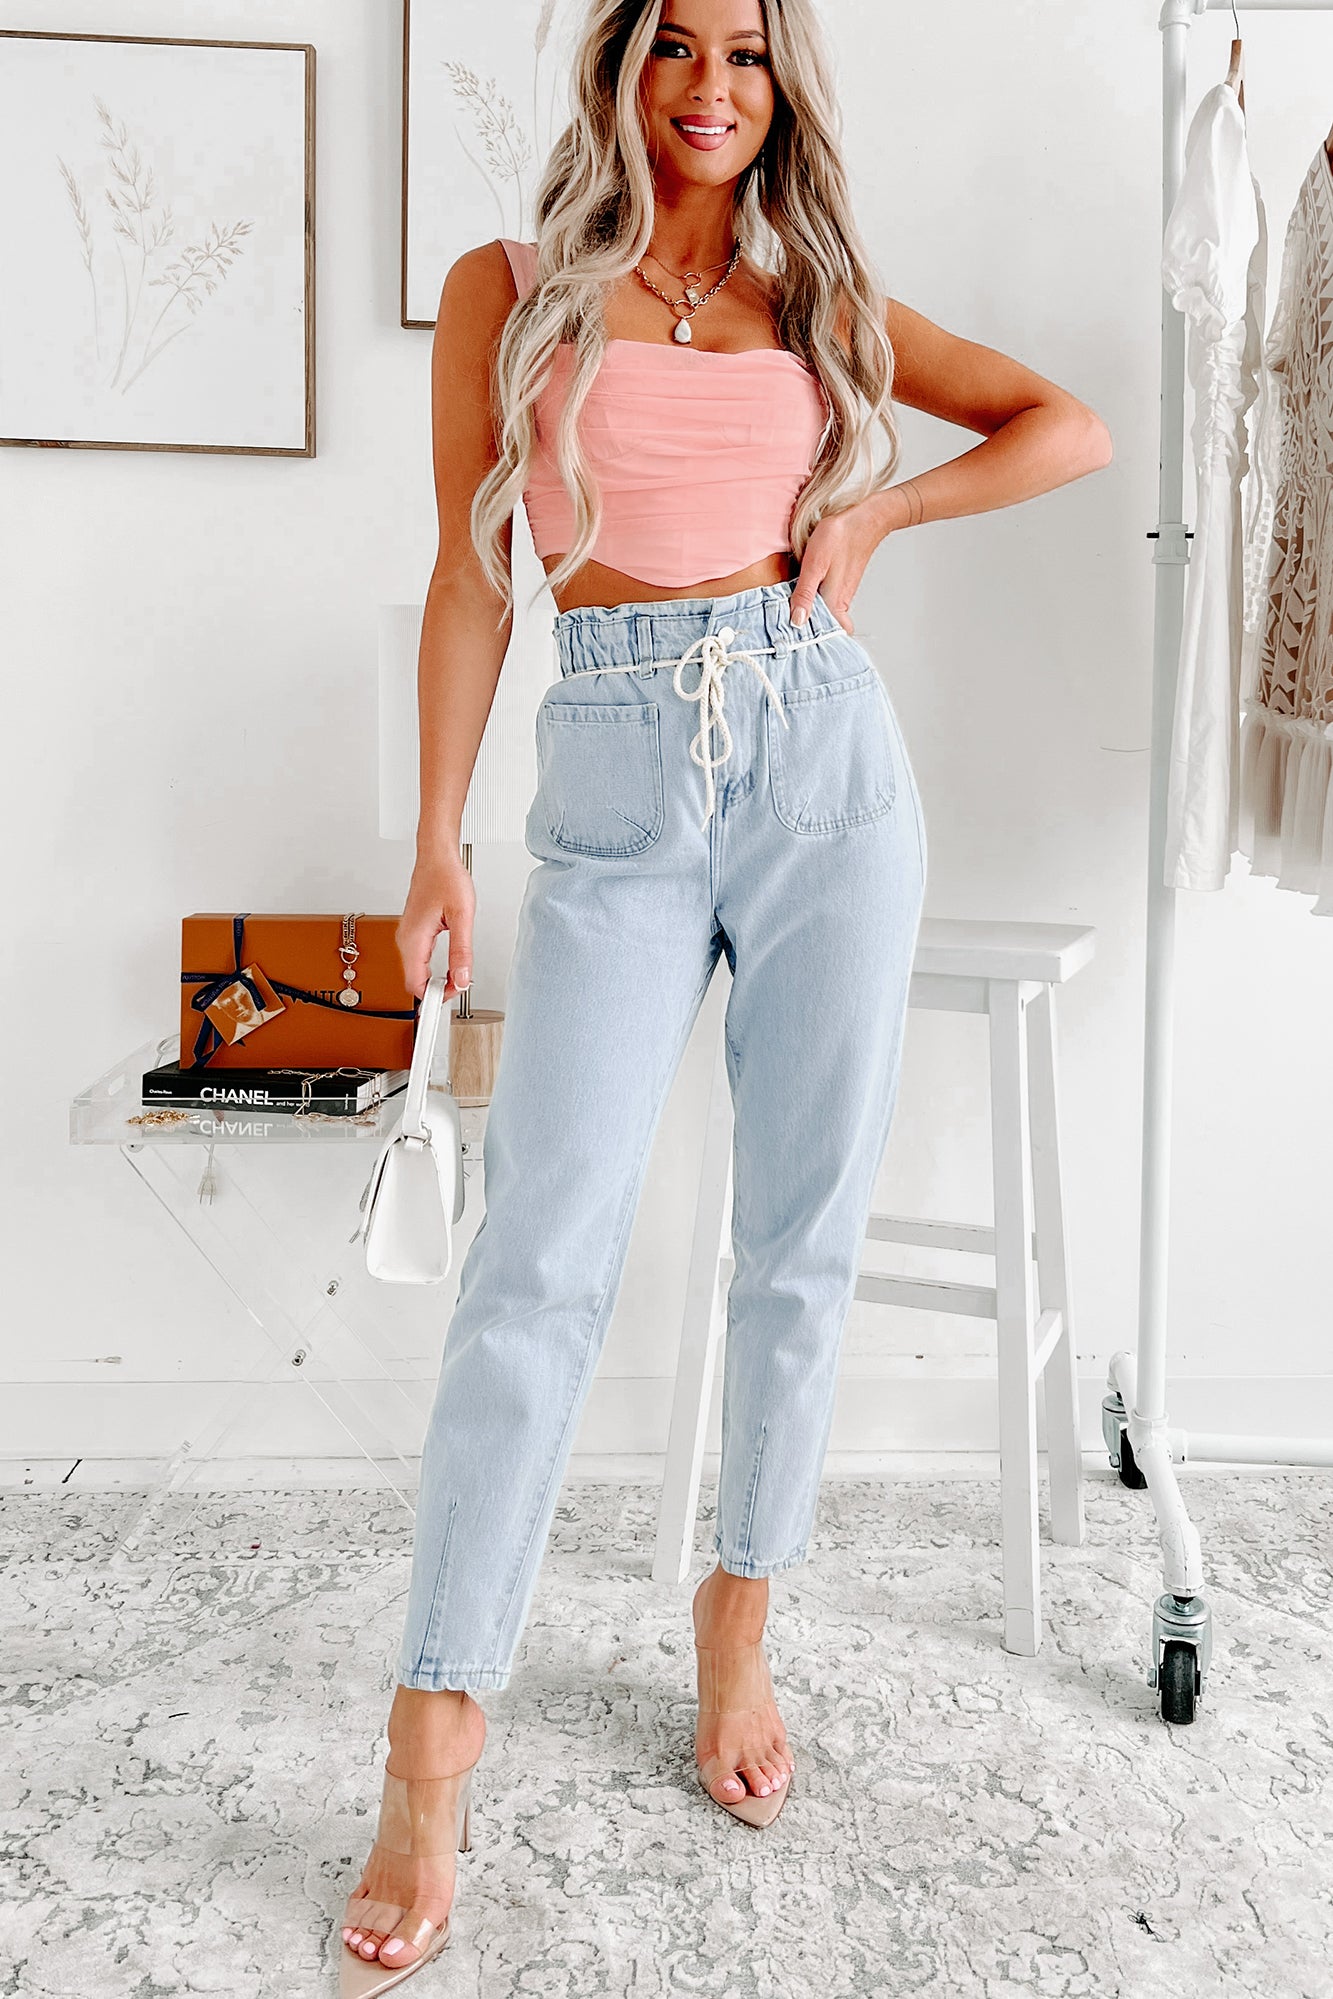 Talk Of The Town Pleated Corset Crop Top (Pink) - NanaMacs